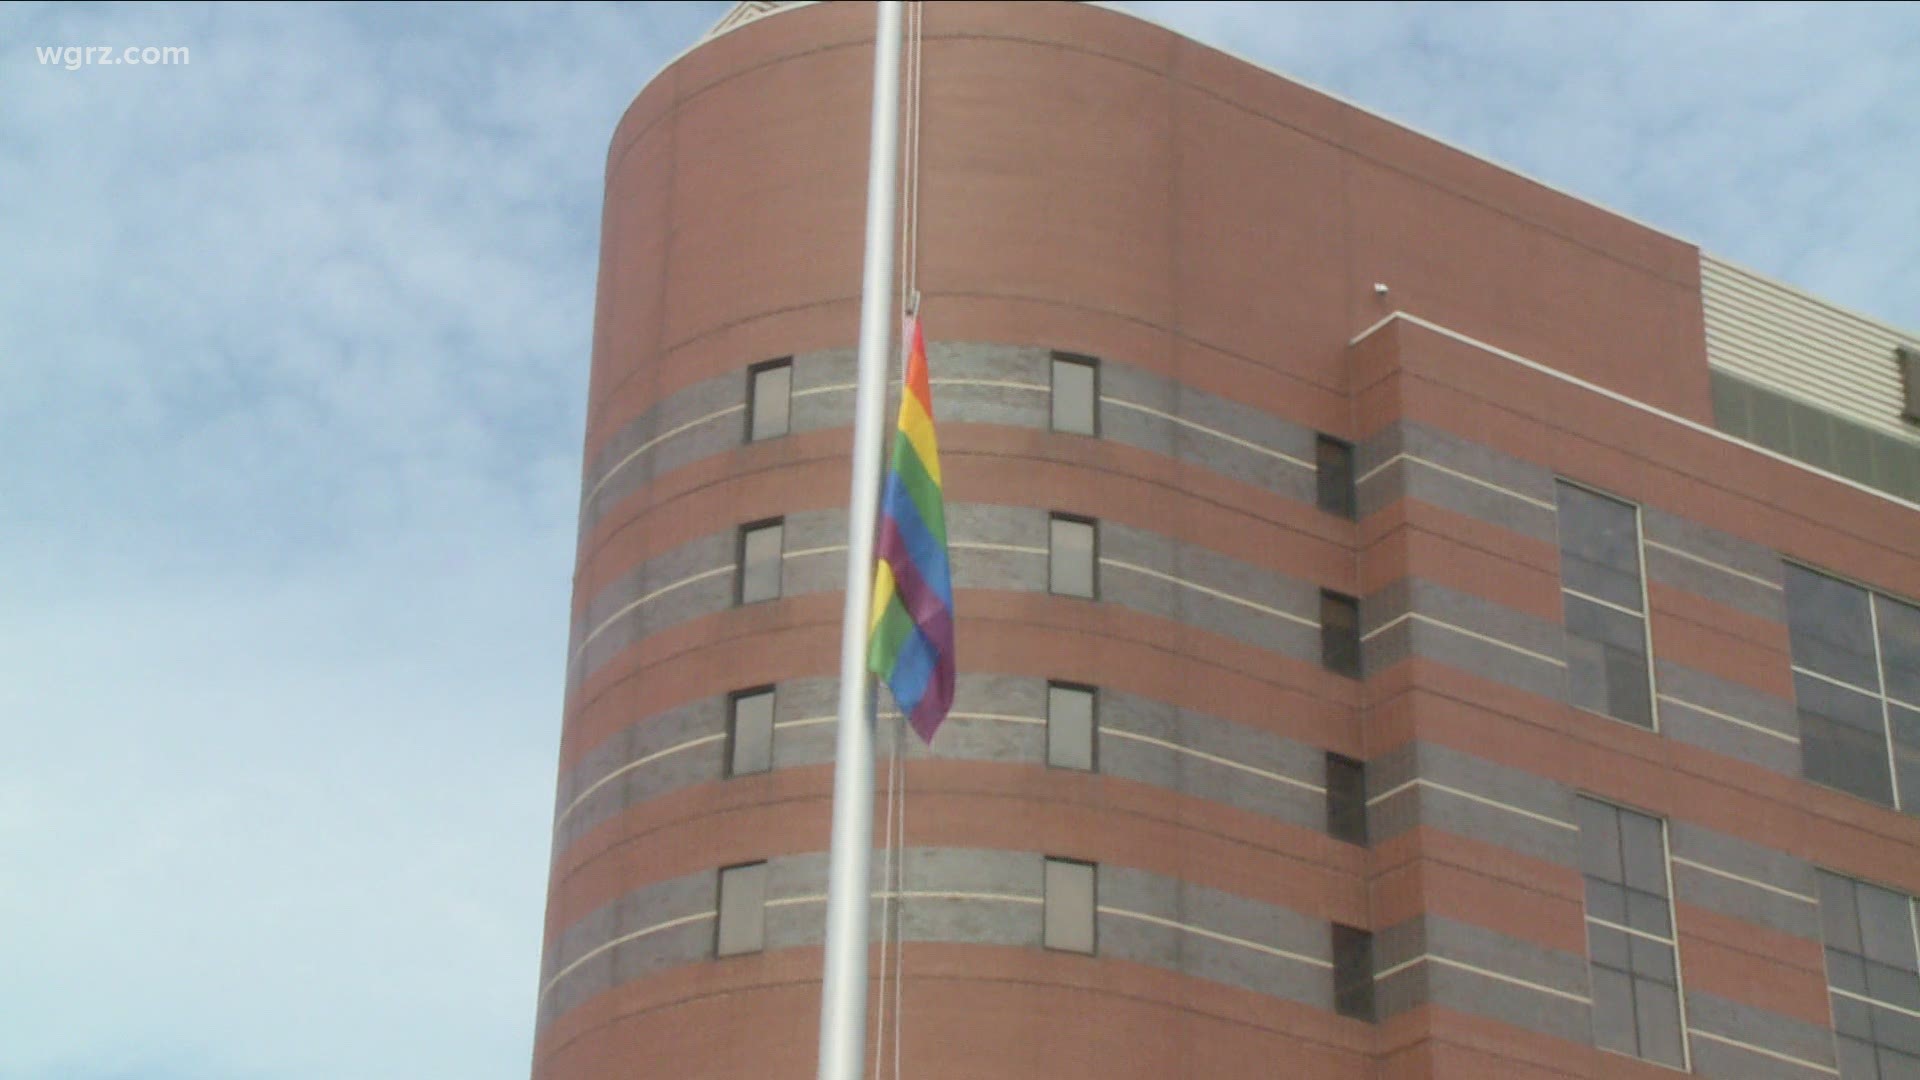 And with Pride Month still in full swing on Monday, Roswell Park raised their rainbow flag in Kaminski Park.